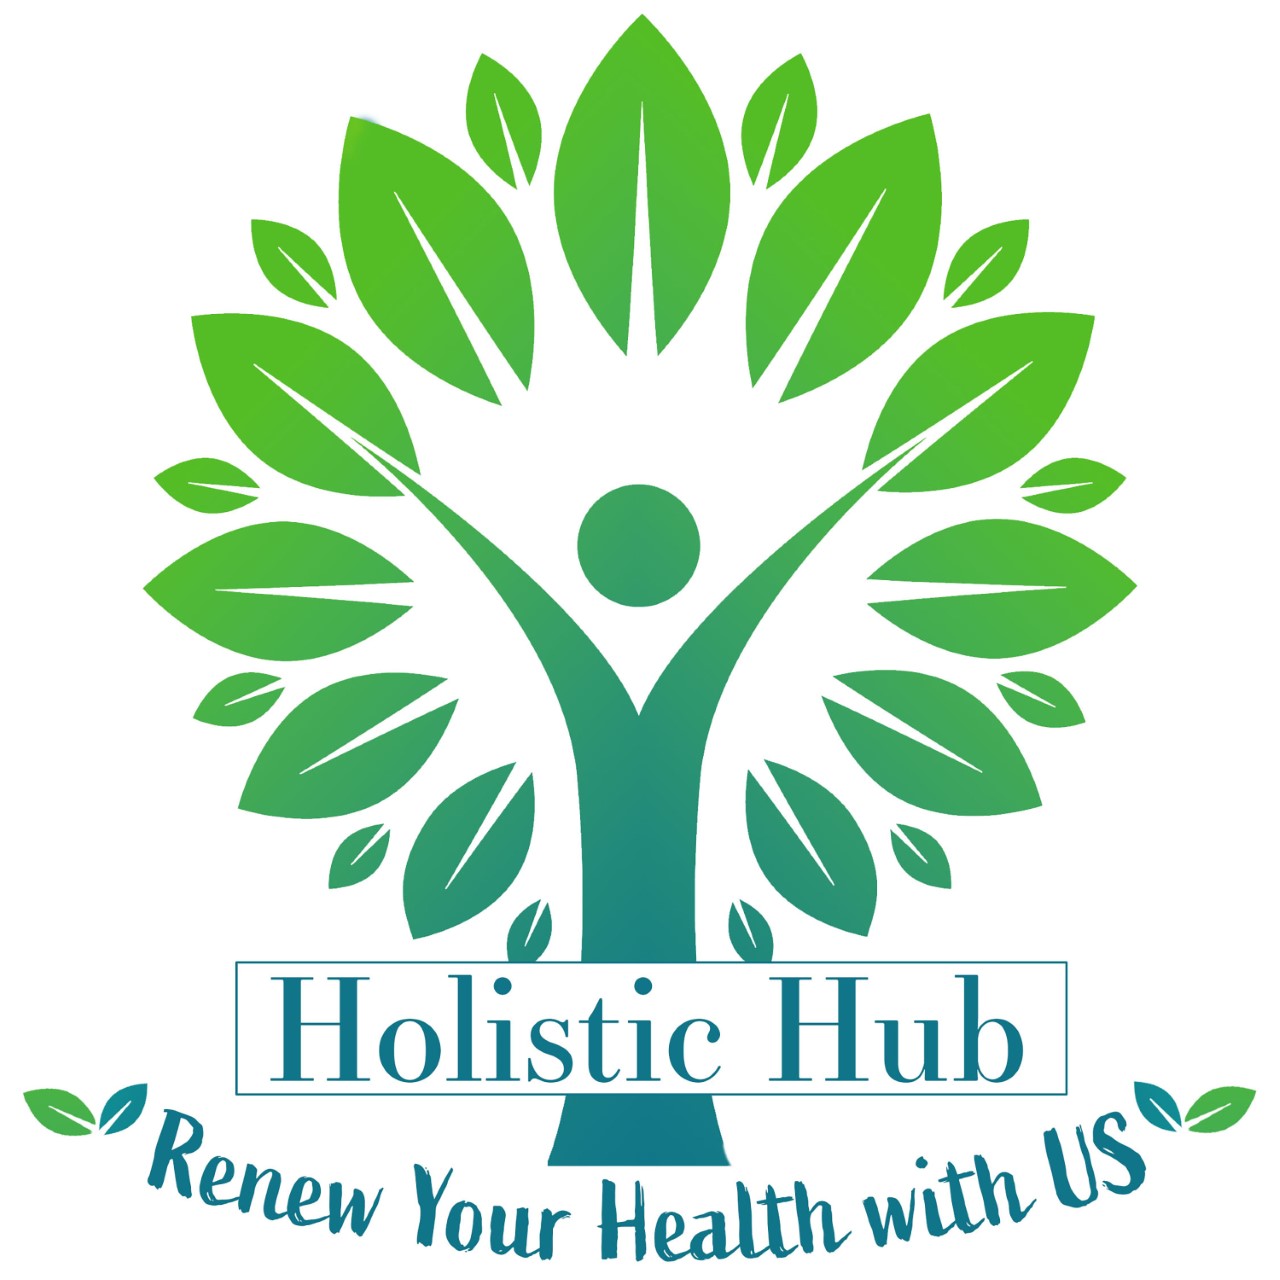 Natural and Holistic Approach to Health and Well-Being!